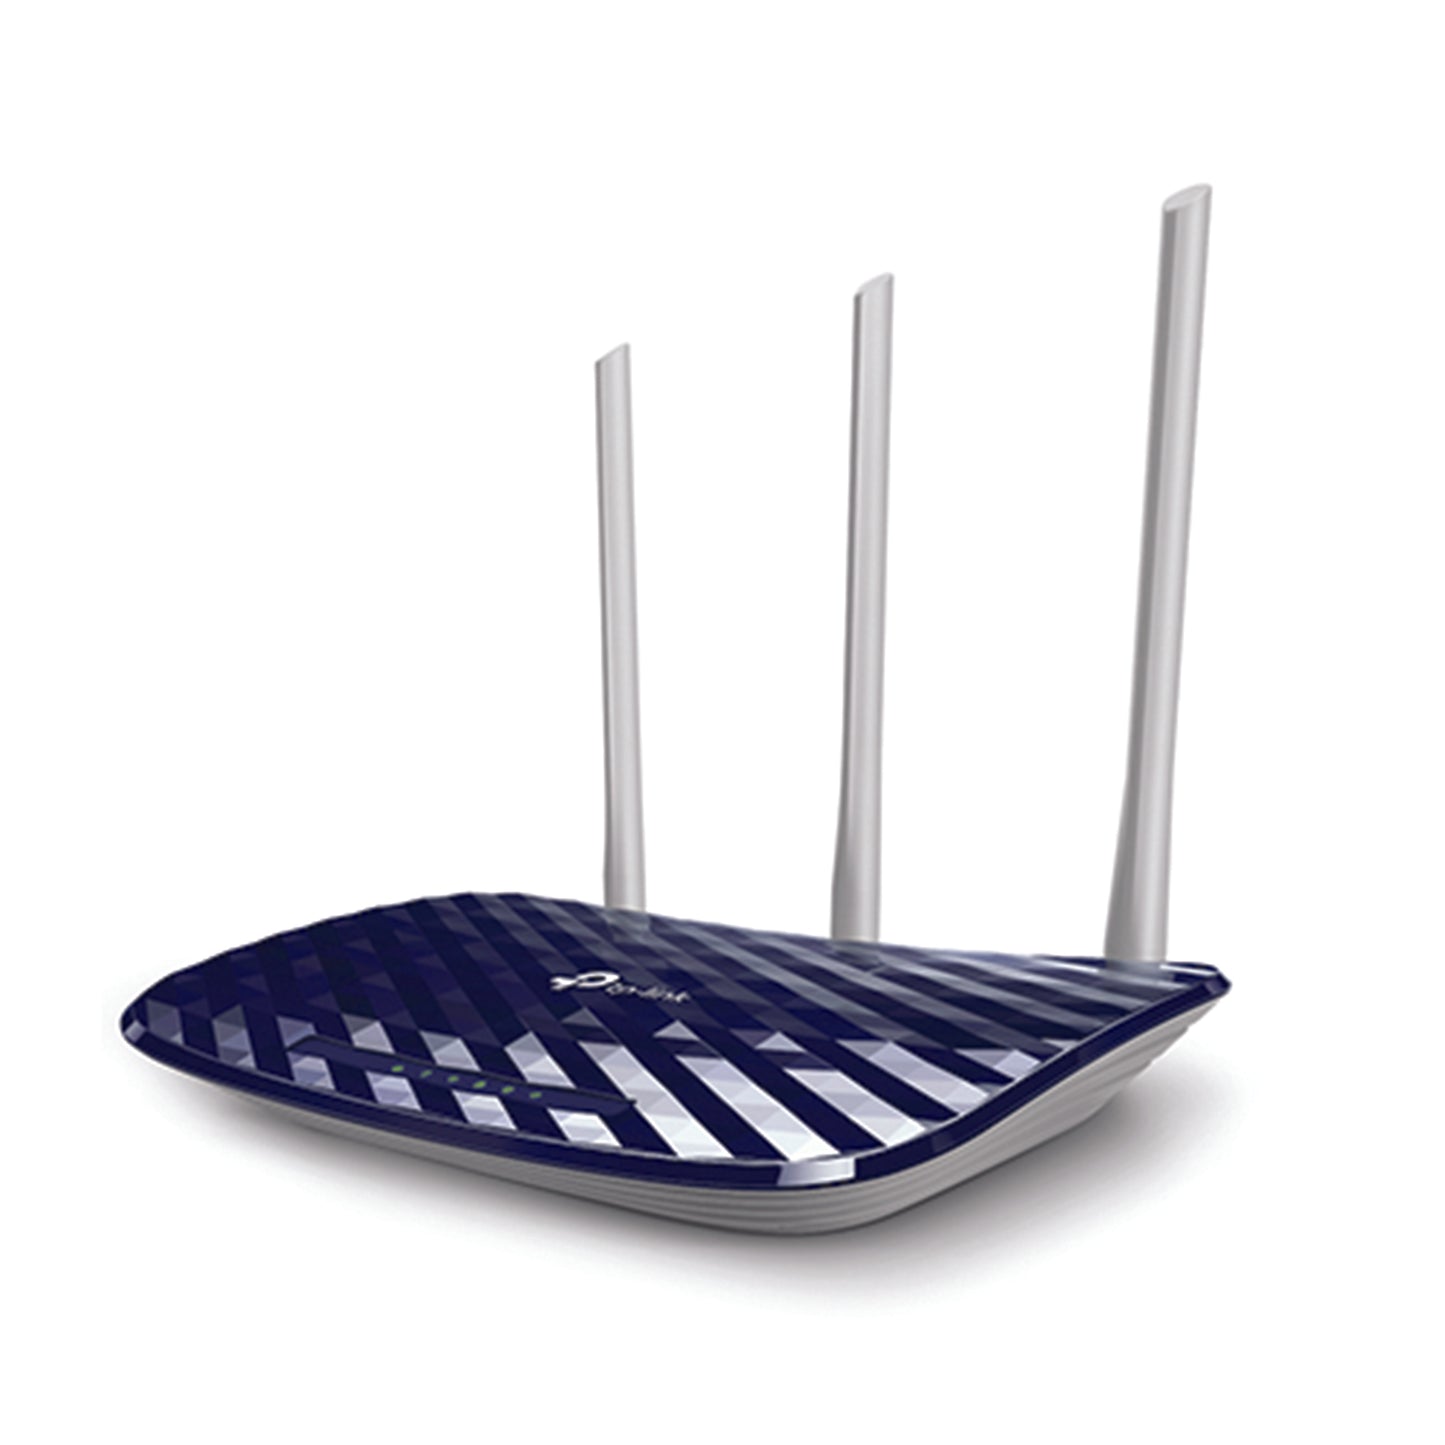 TP-Link Wireless Dual Band Router AC750 C20